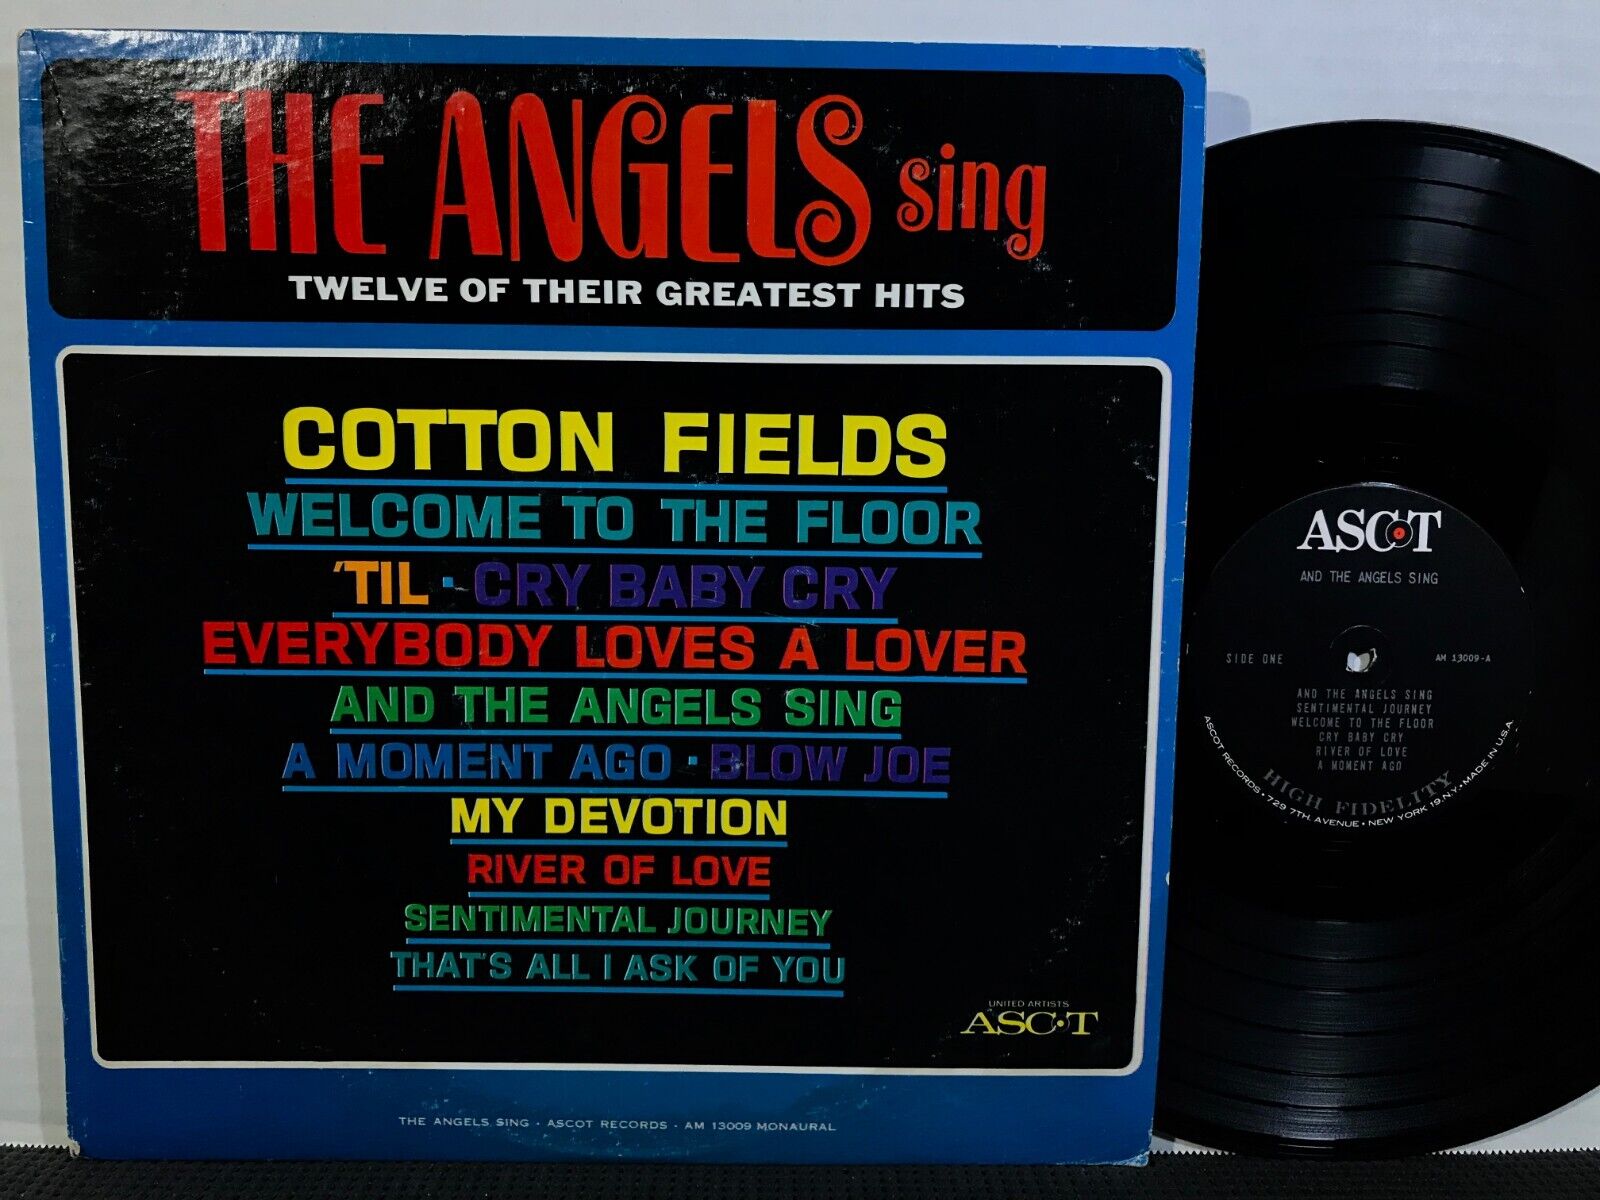 THE ANGELS Sing Twelve O Their Greatest Hits LP ASCOT AM 13009 MONO 1963